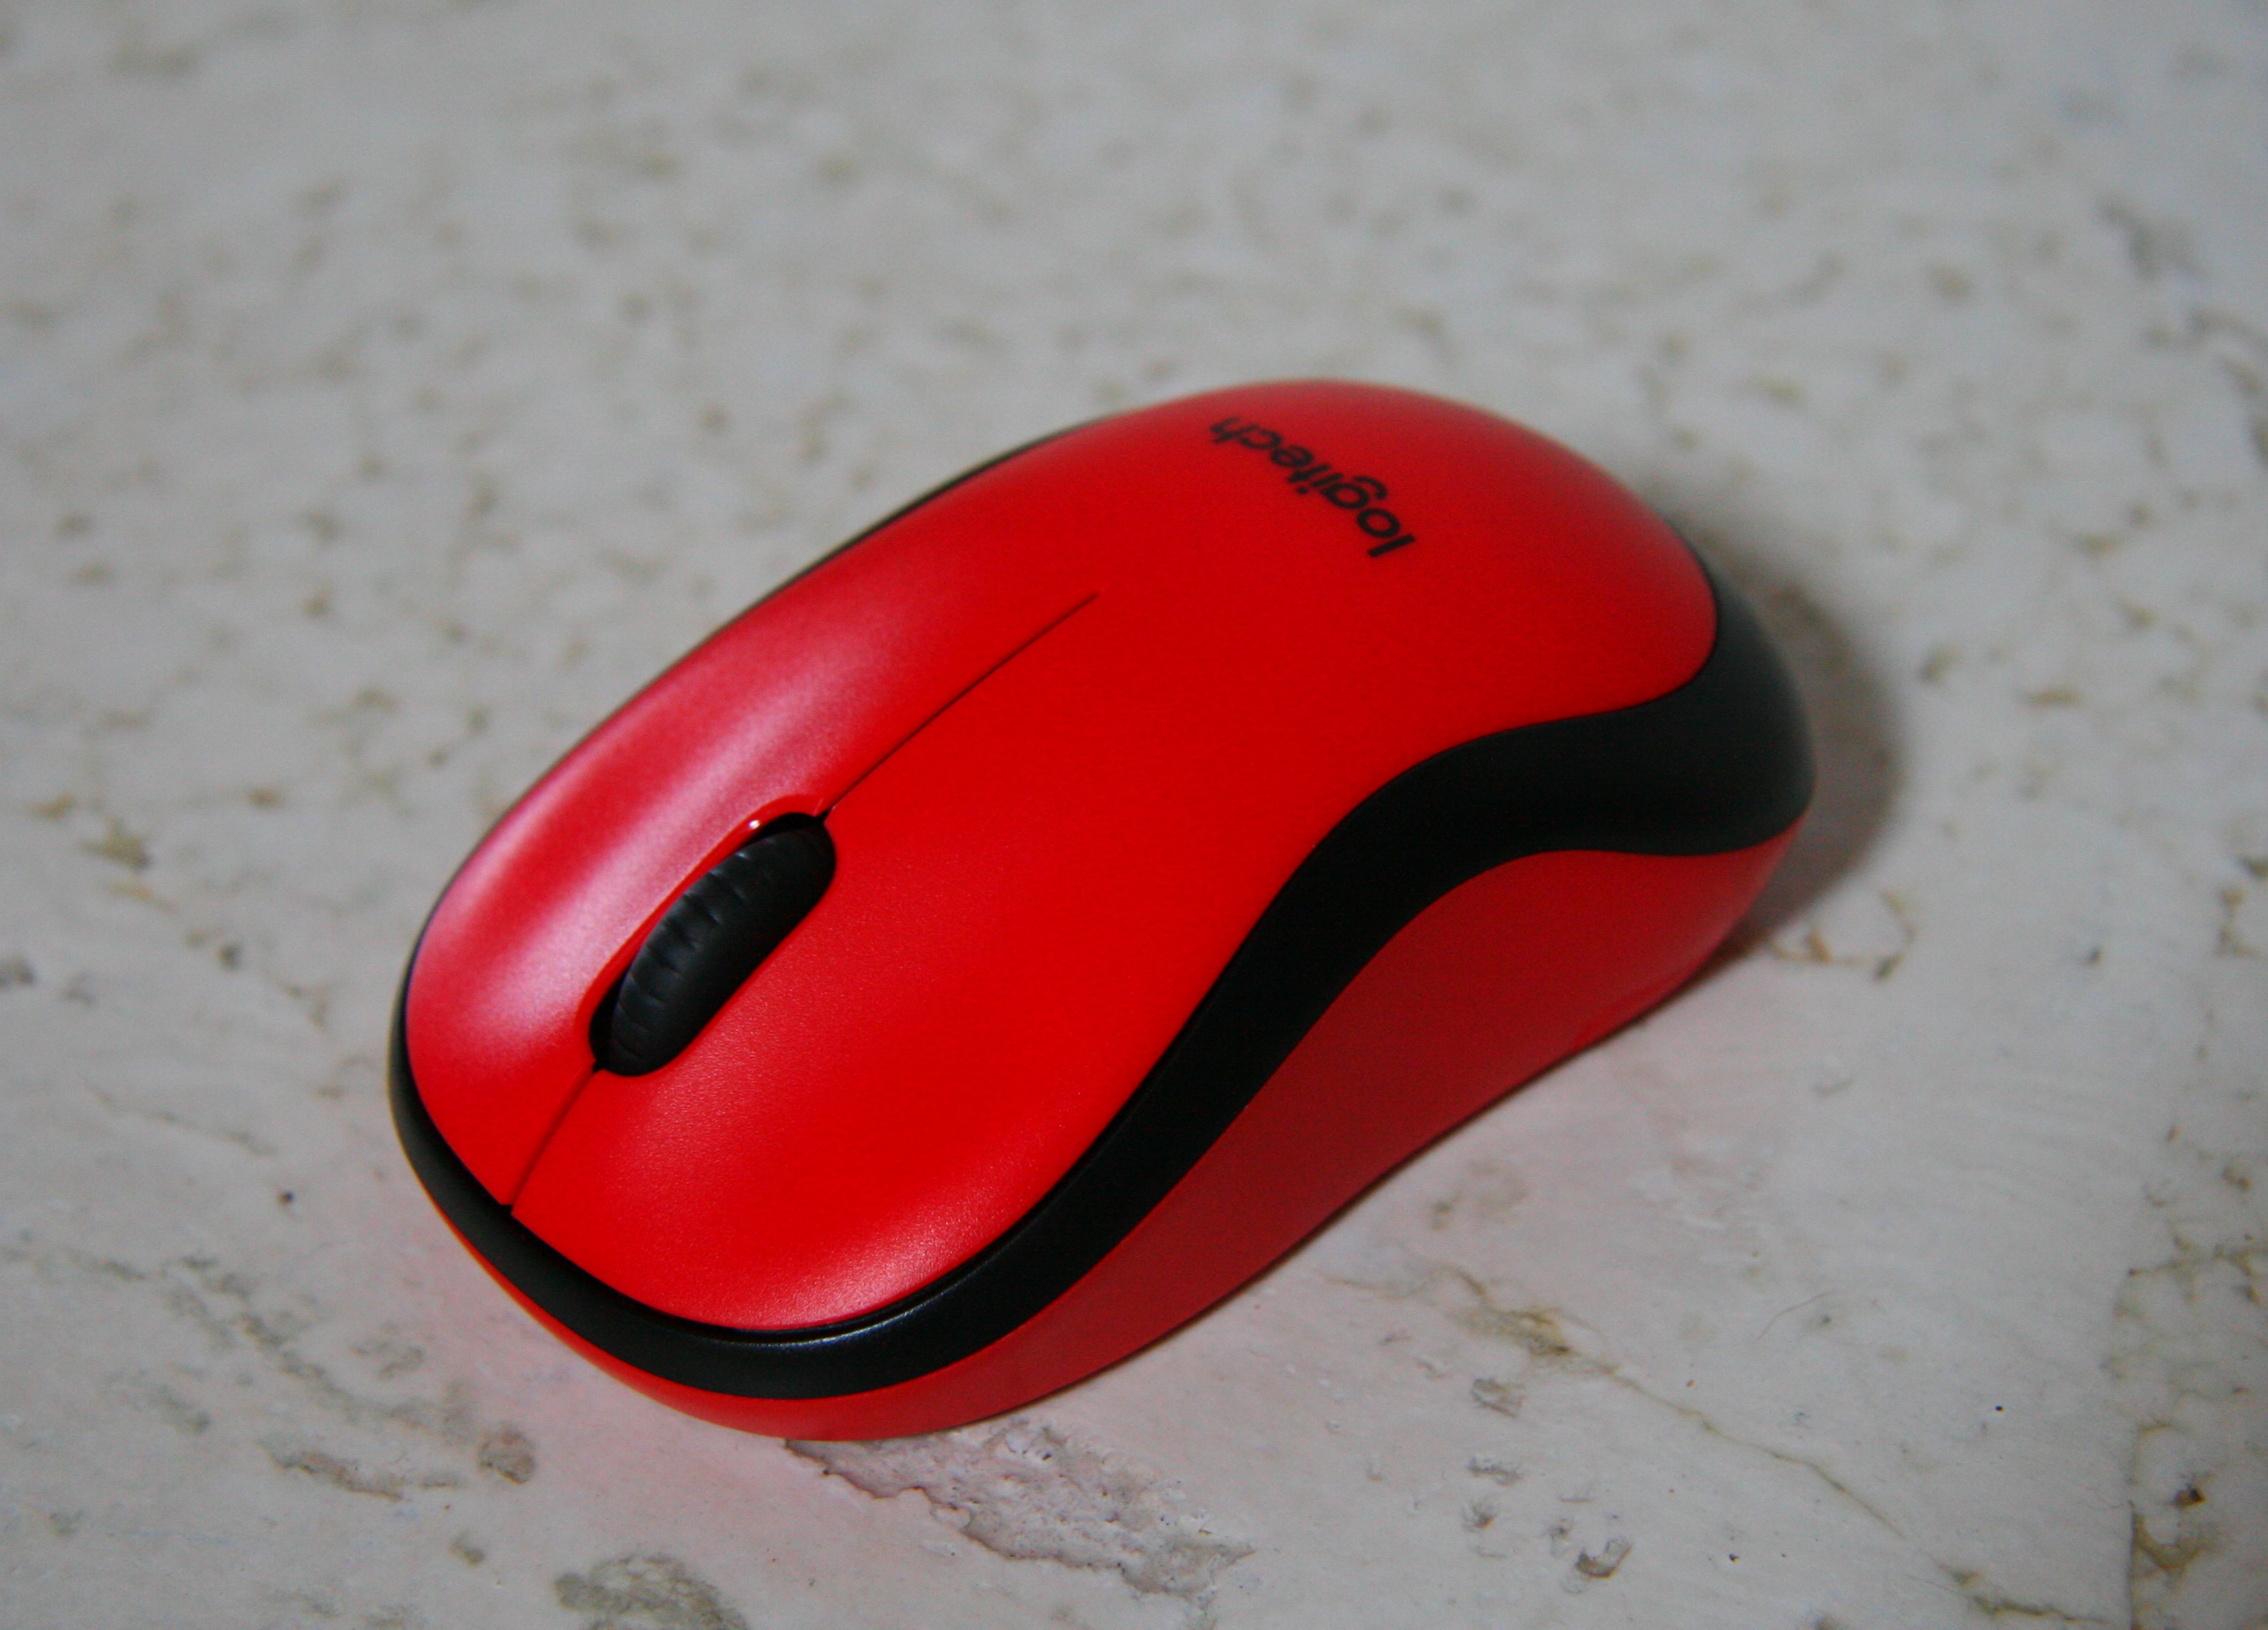 Logitech M330 and M220 silent mice – Hardware and Game Gear Reviews